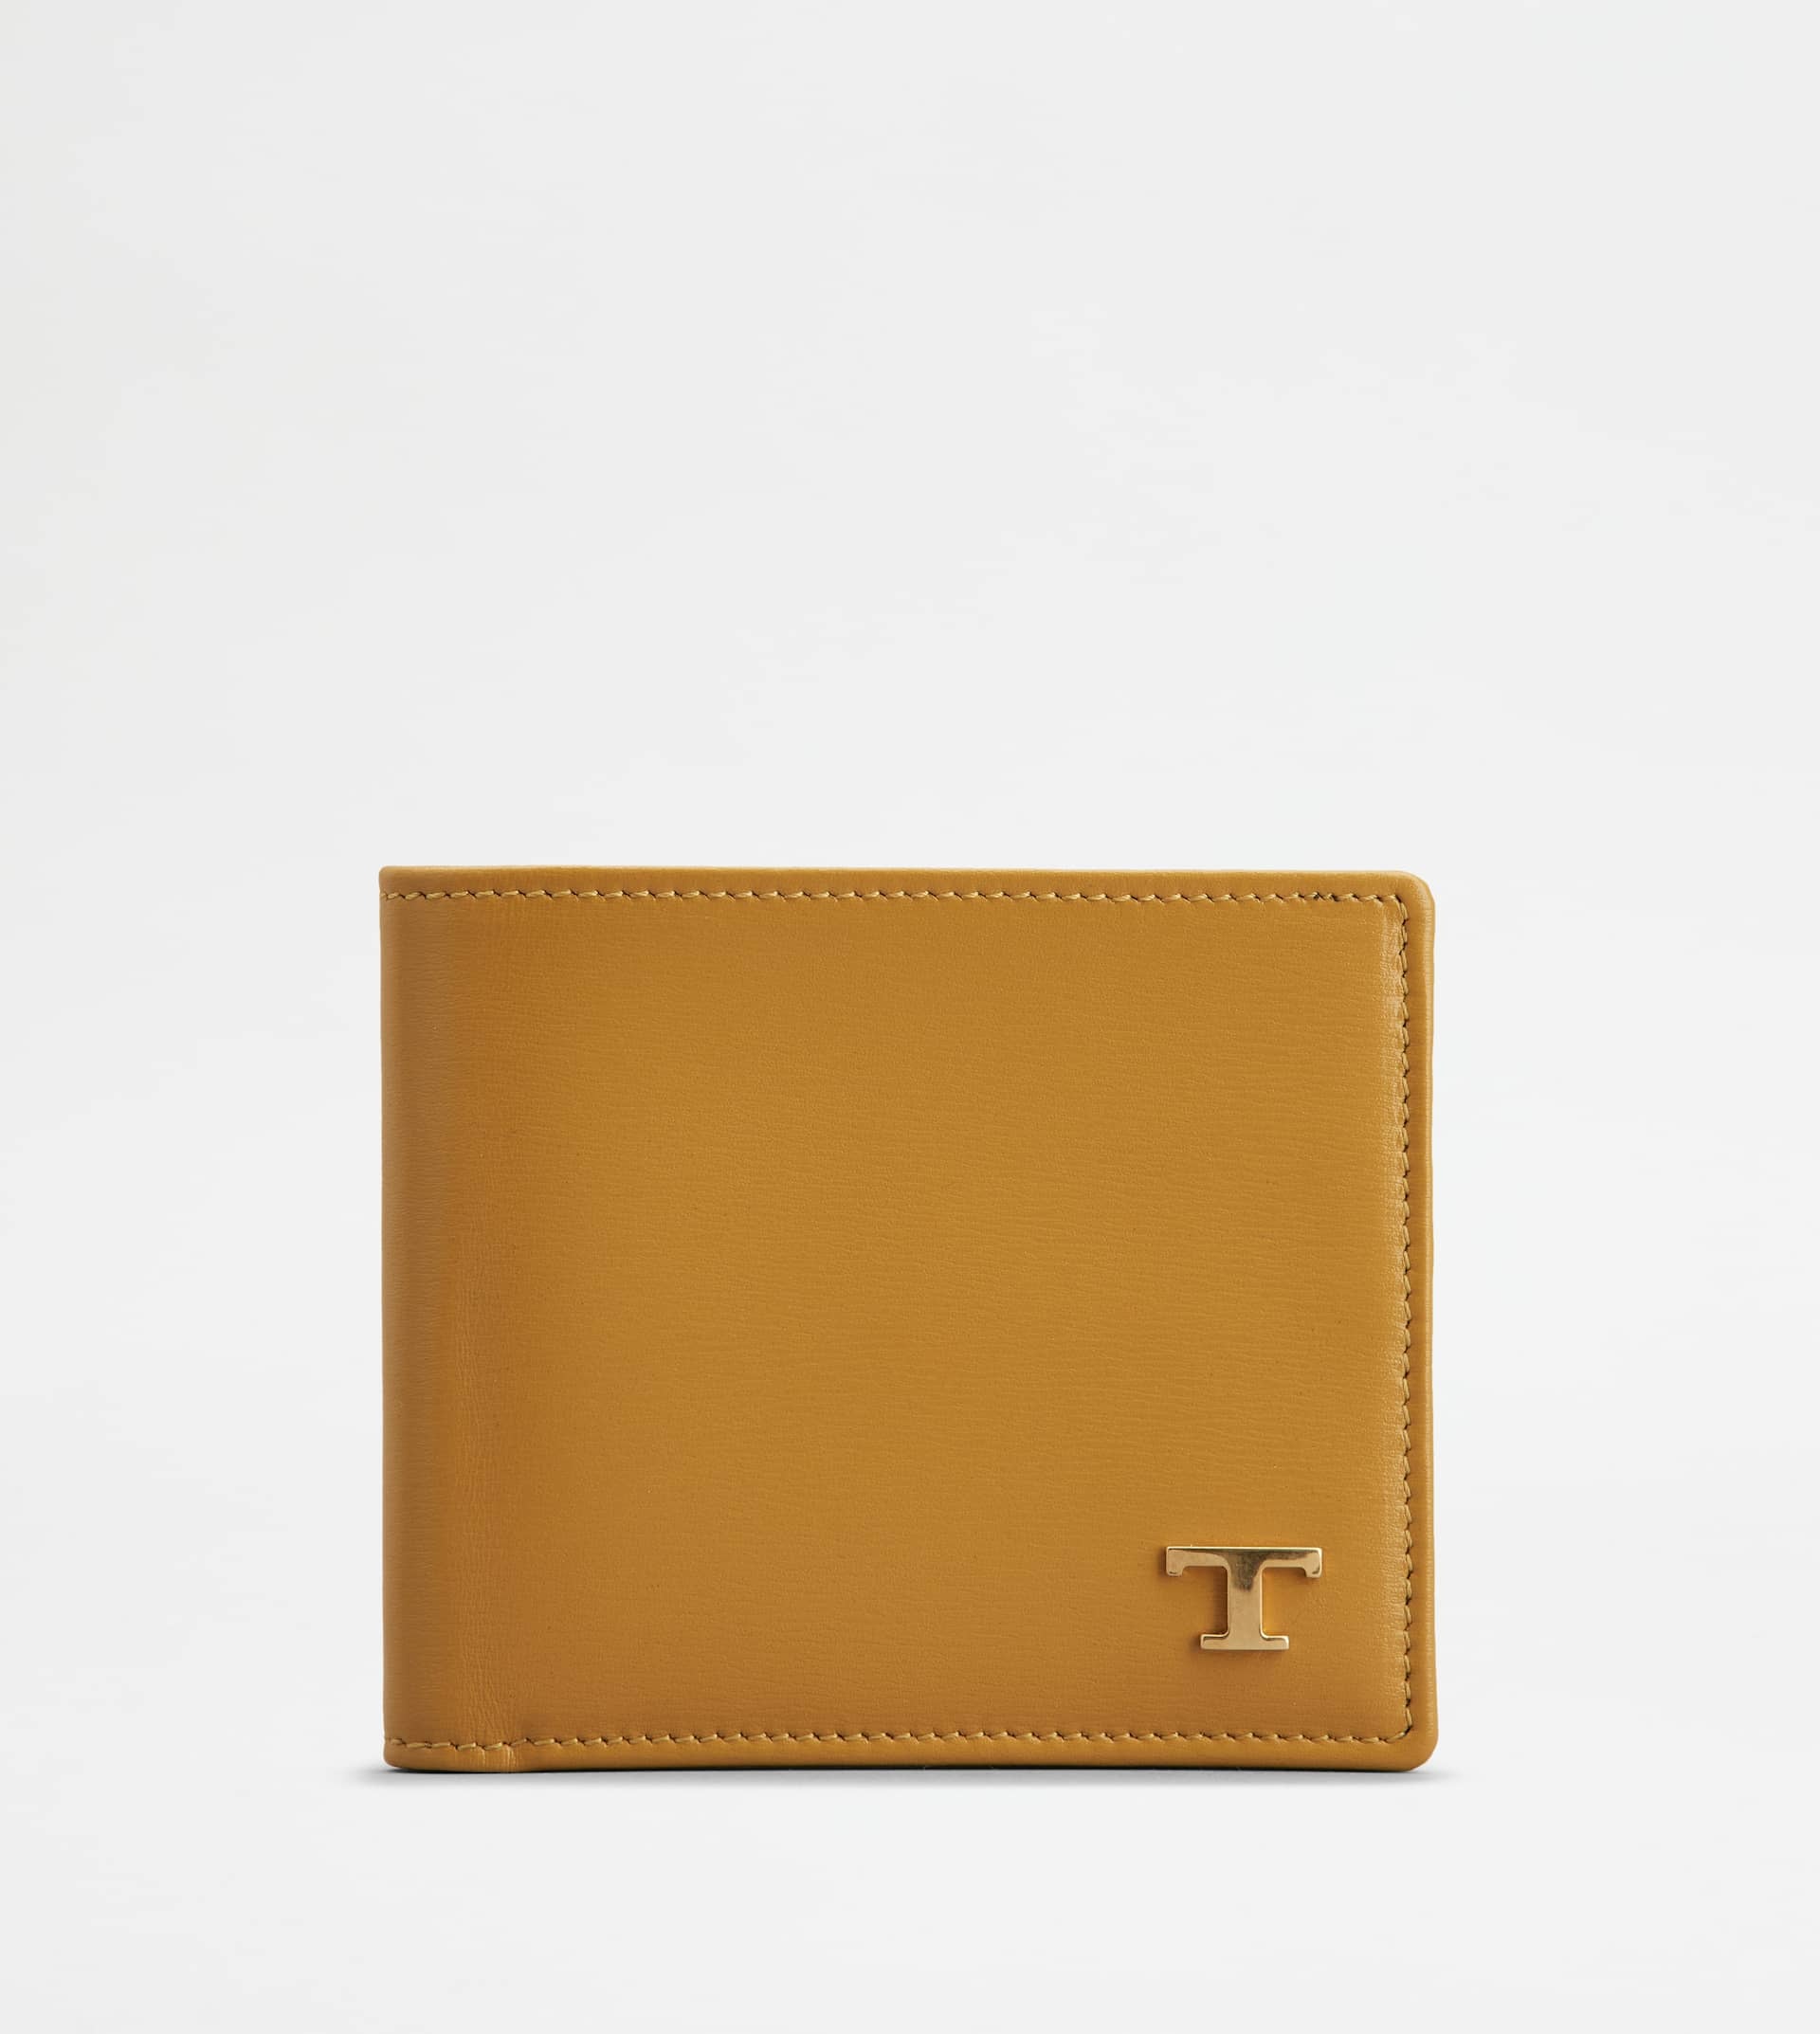 TOD'S WALLET IN LEATHER - YELLOW - 1